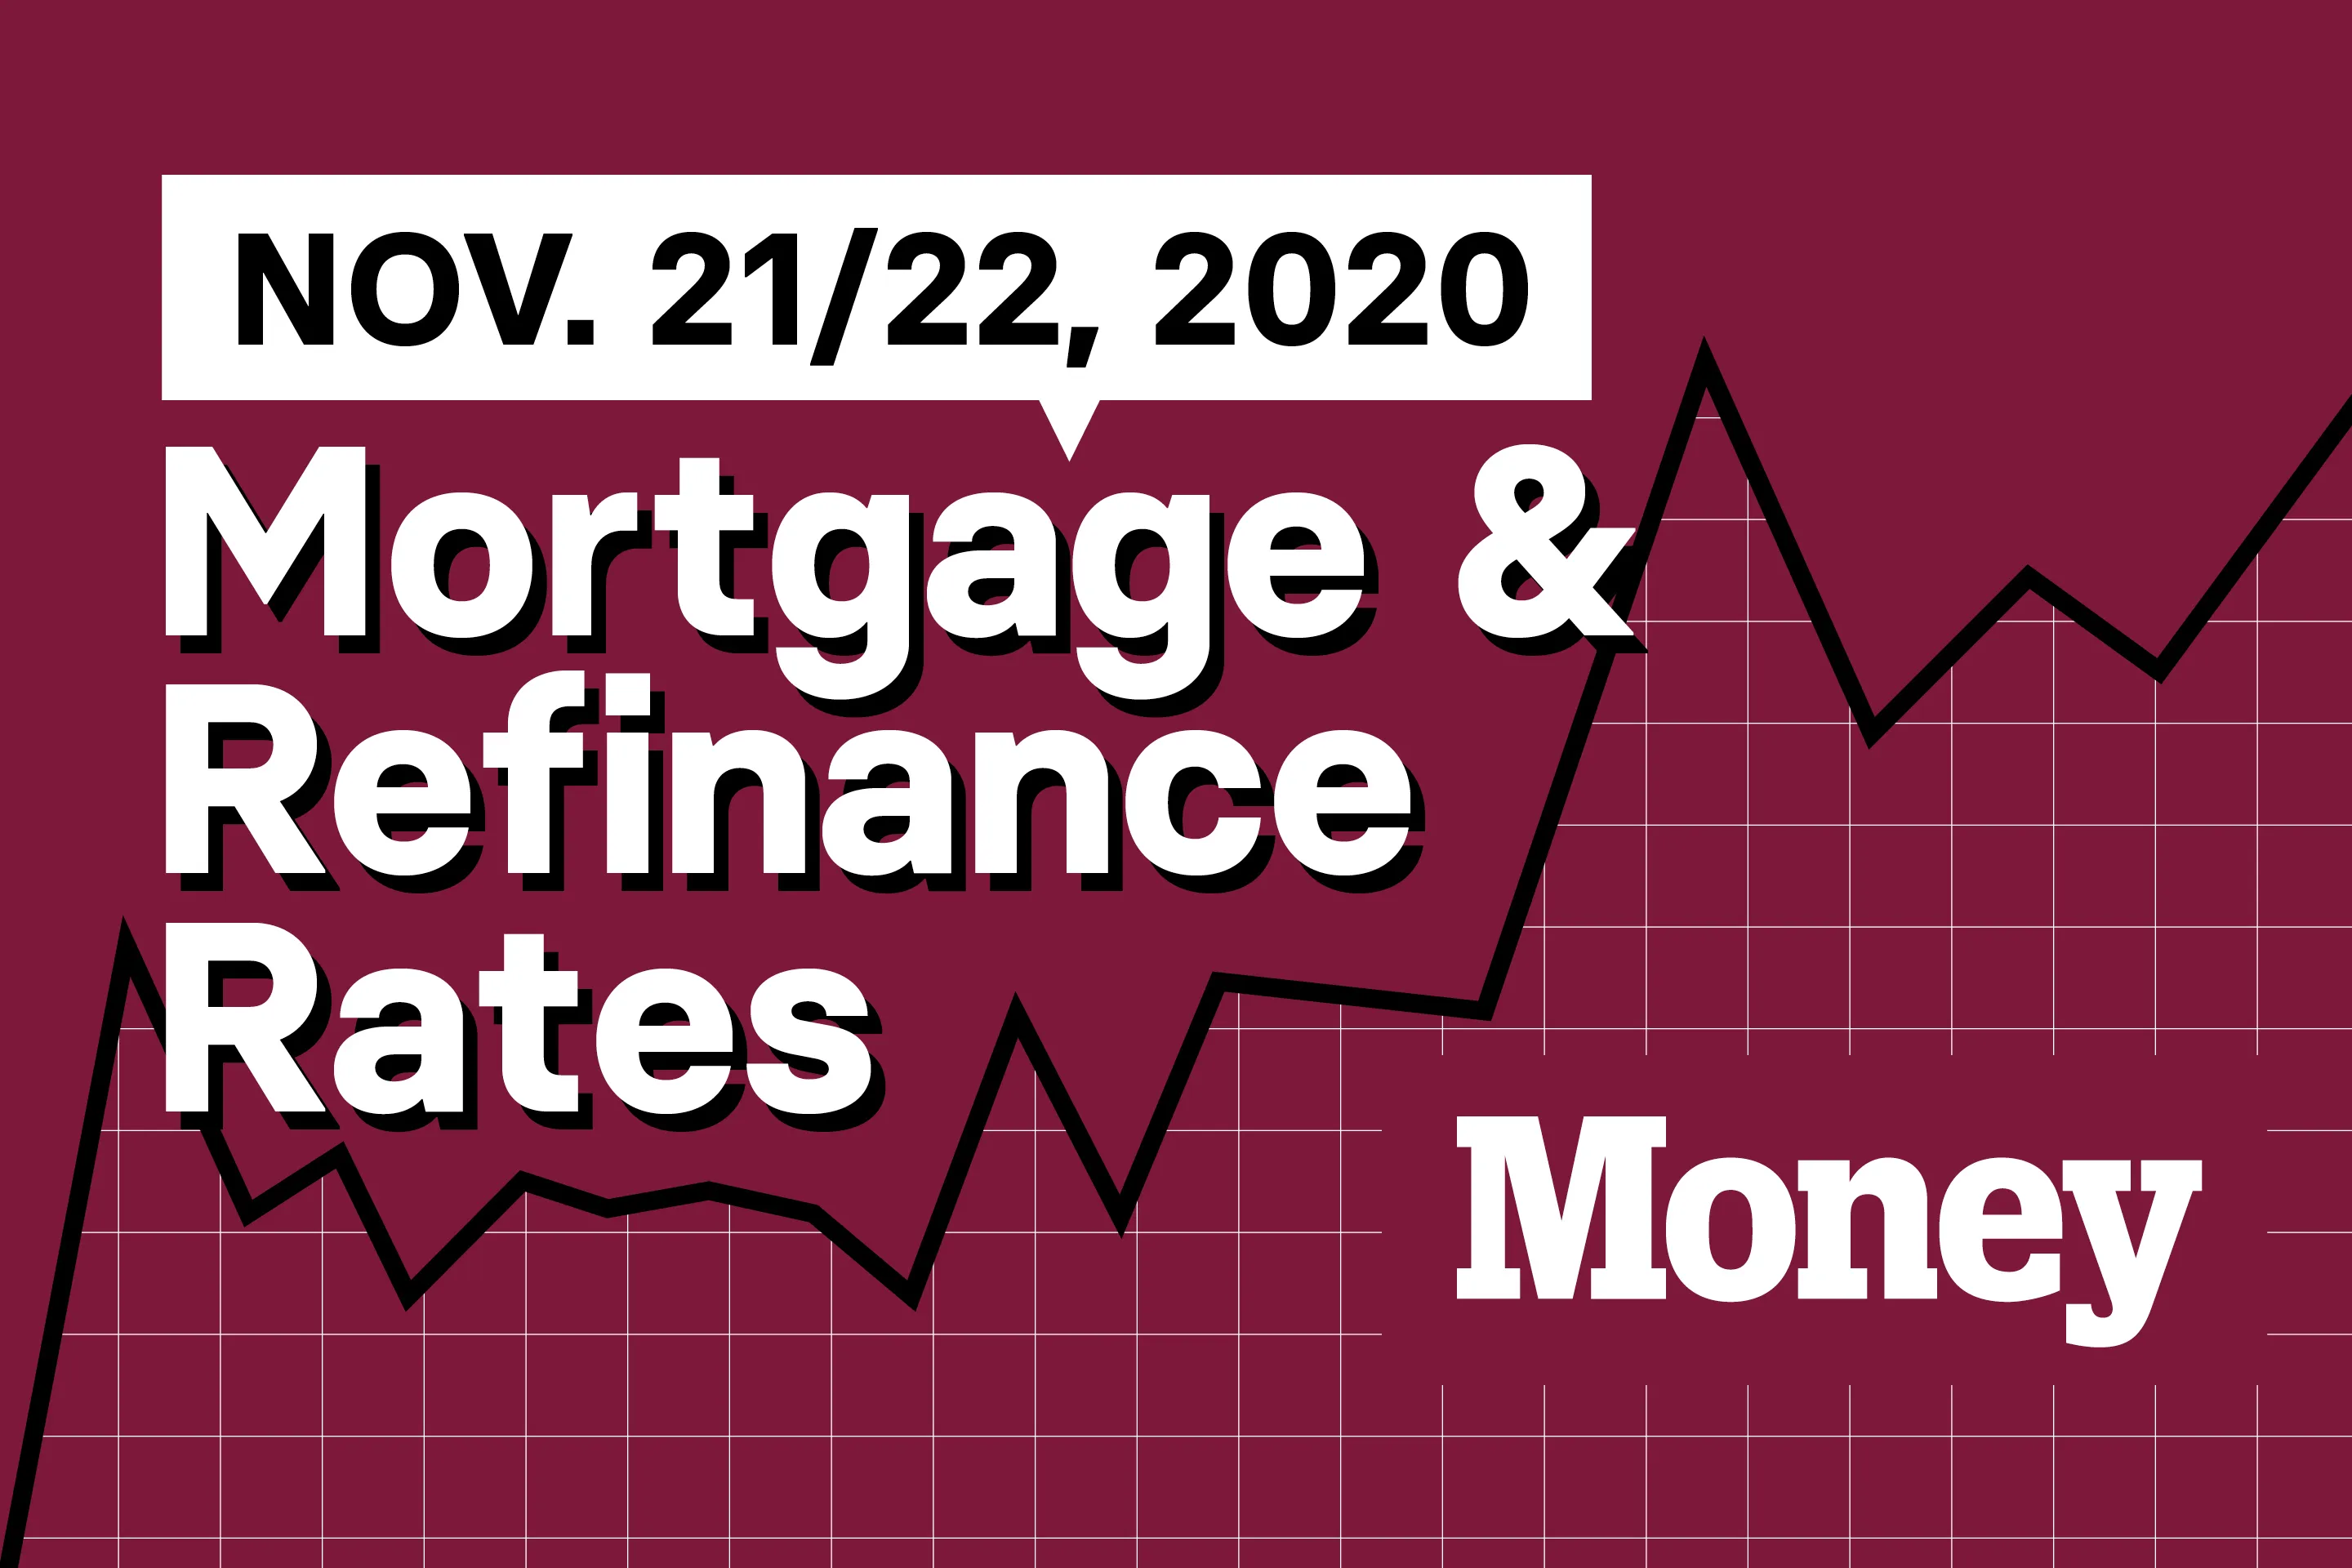 Today's Best Mortgage and Refinance Rates for November 21 and 22